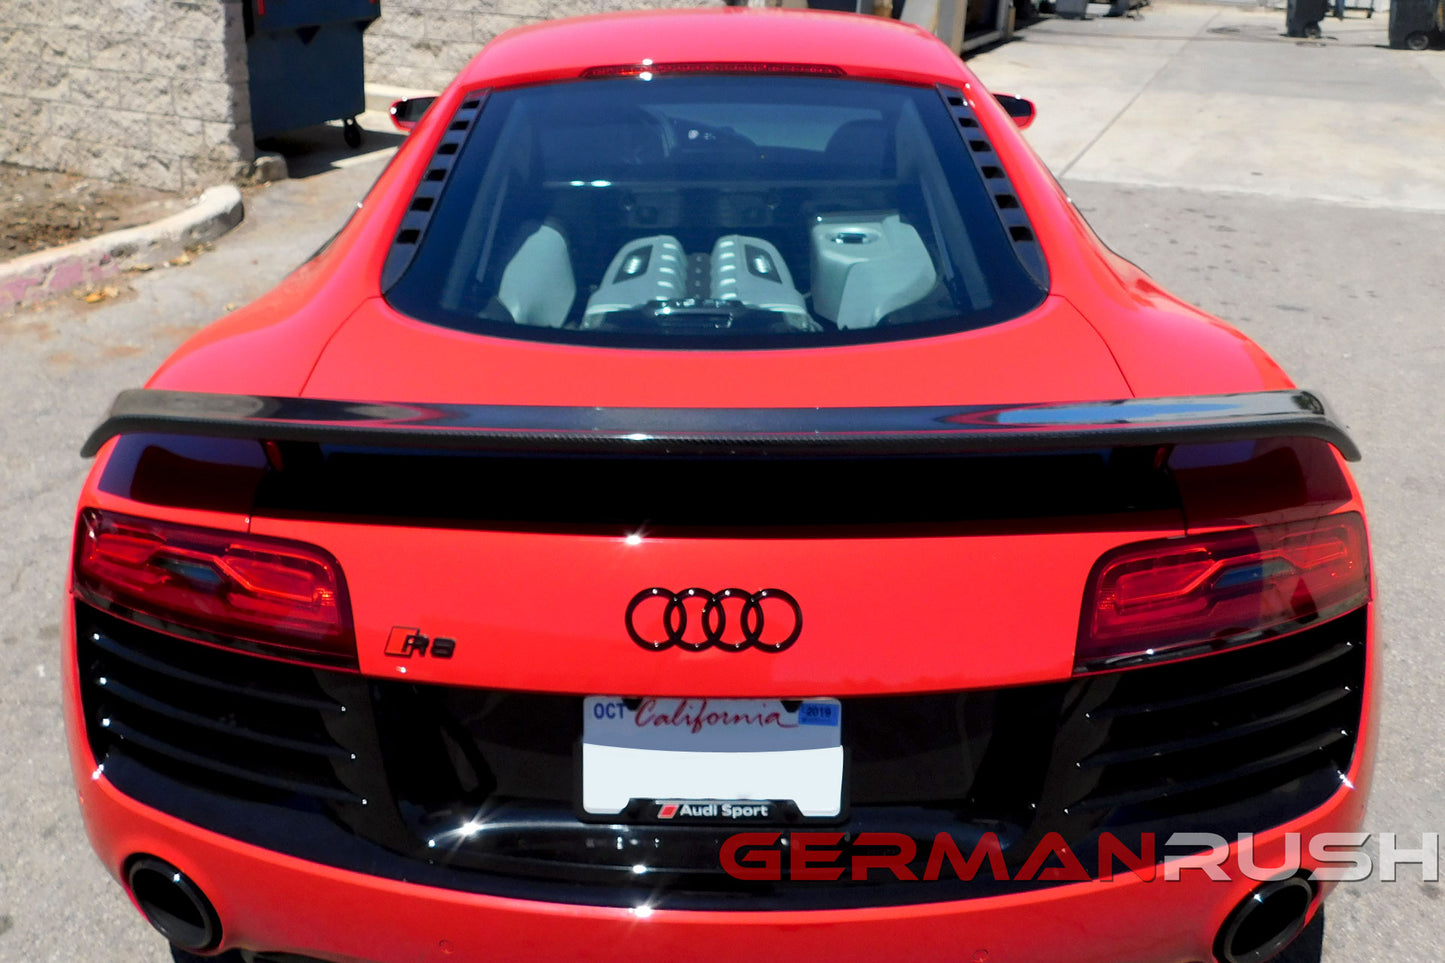 Rear Engine Vents Coupe in Carbon Fiber for Audi R8 2007-2014